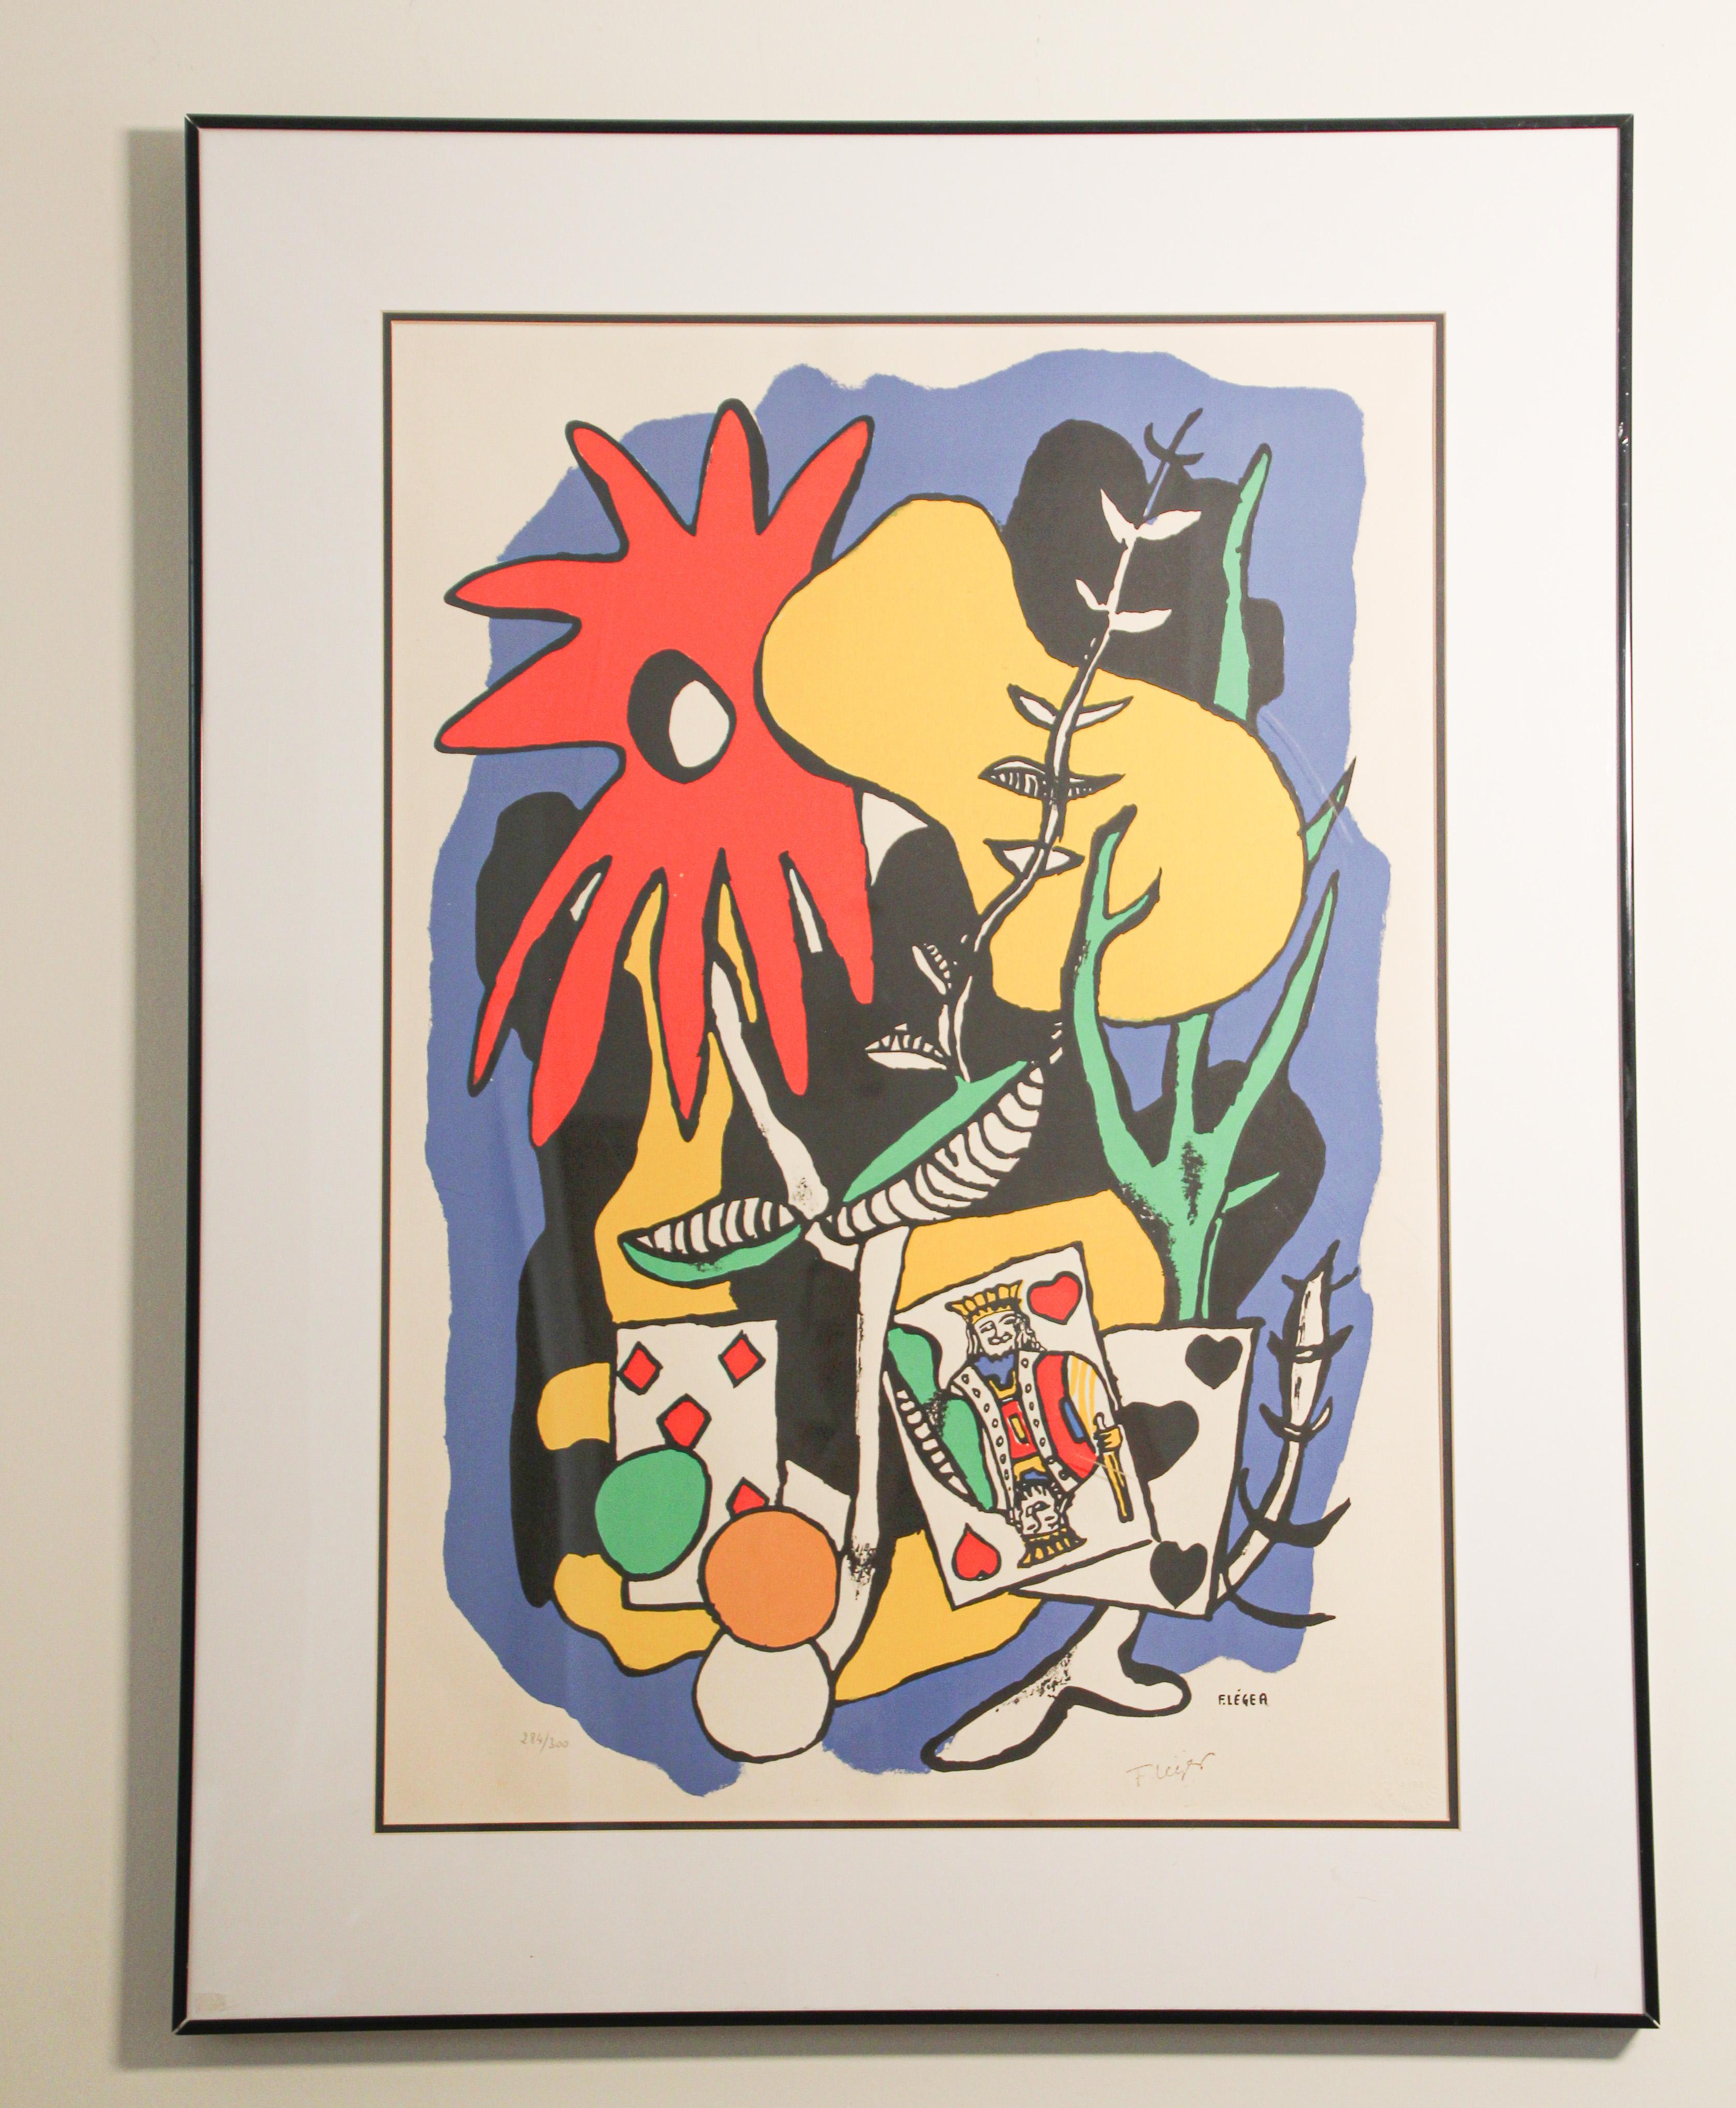 Rare limited edition of 284/300, pencil signed lithograph by Fernand Leger.
Le Roi de cœur (The King of Heart) 1949.
This piece showcases Leger's use of color and movement in his work.
The lithograph by itself without the frame is 20